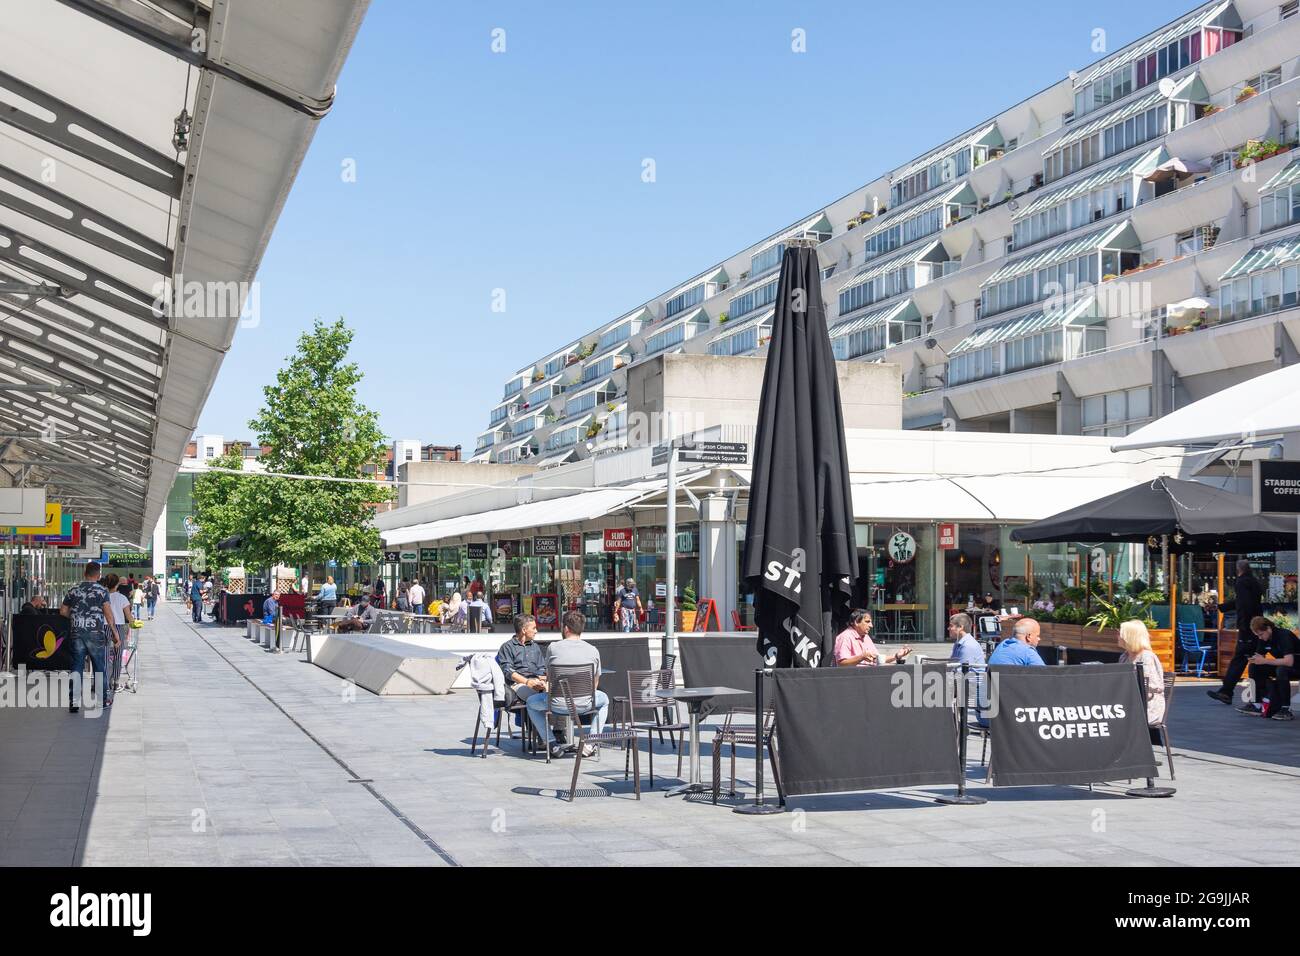 The Brunswick Centre retail and apartment complex, Marchmont Street, Bloomsbury, London Borough of Camden, Greater London, England, United Kingdom Stock Photo